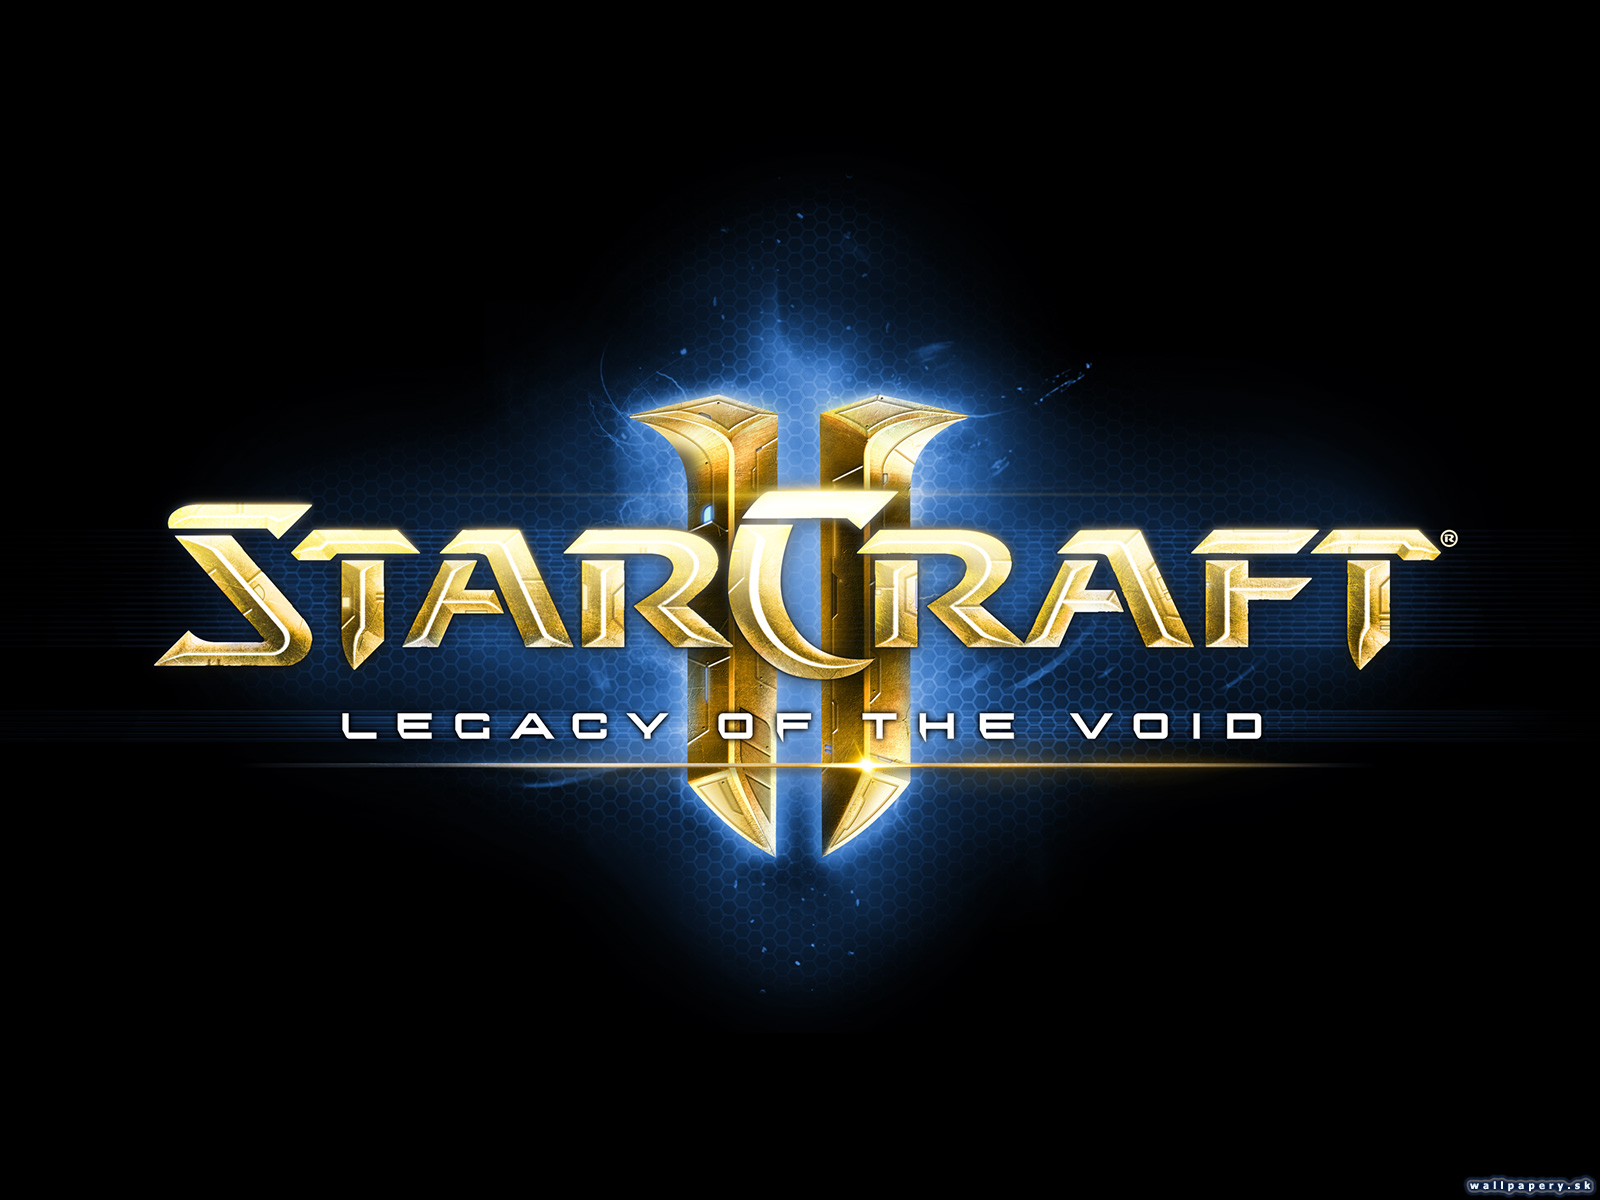 StarCraft II: Legacy of the Void - wallpaper 2